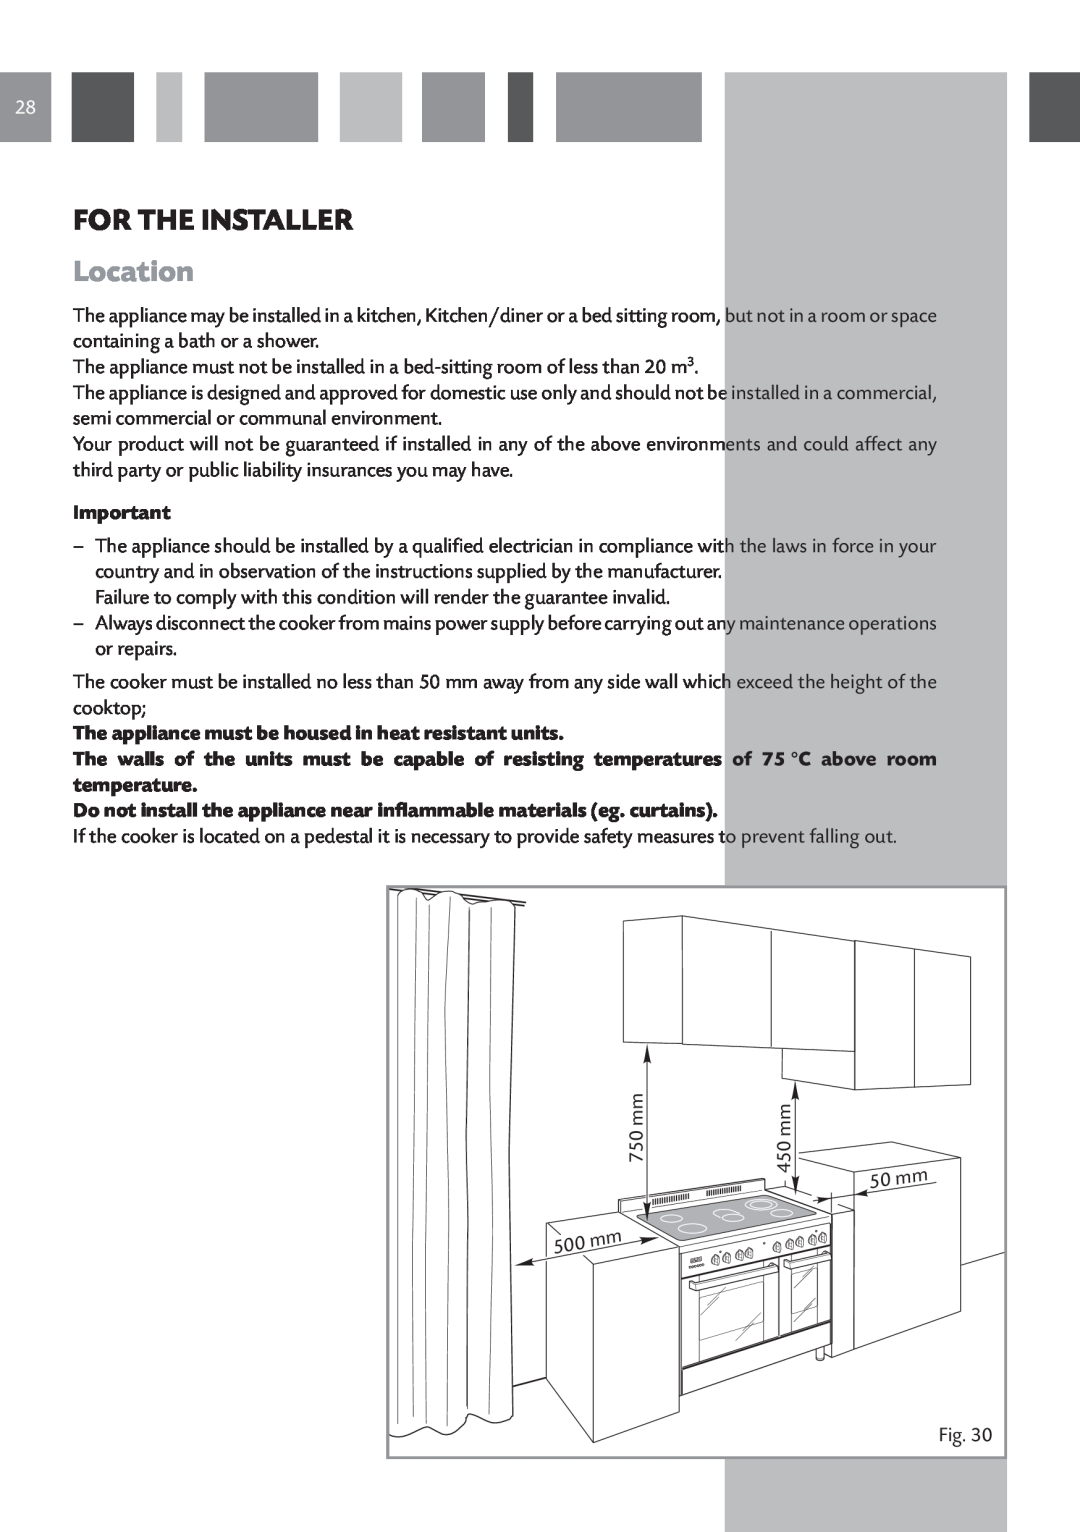 CDA RC 9620 manual Location, The appliance must be housed in heat resistant units, For The Installer 